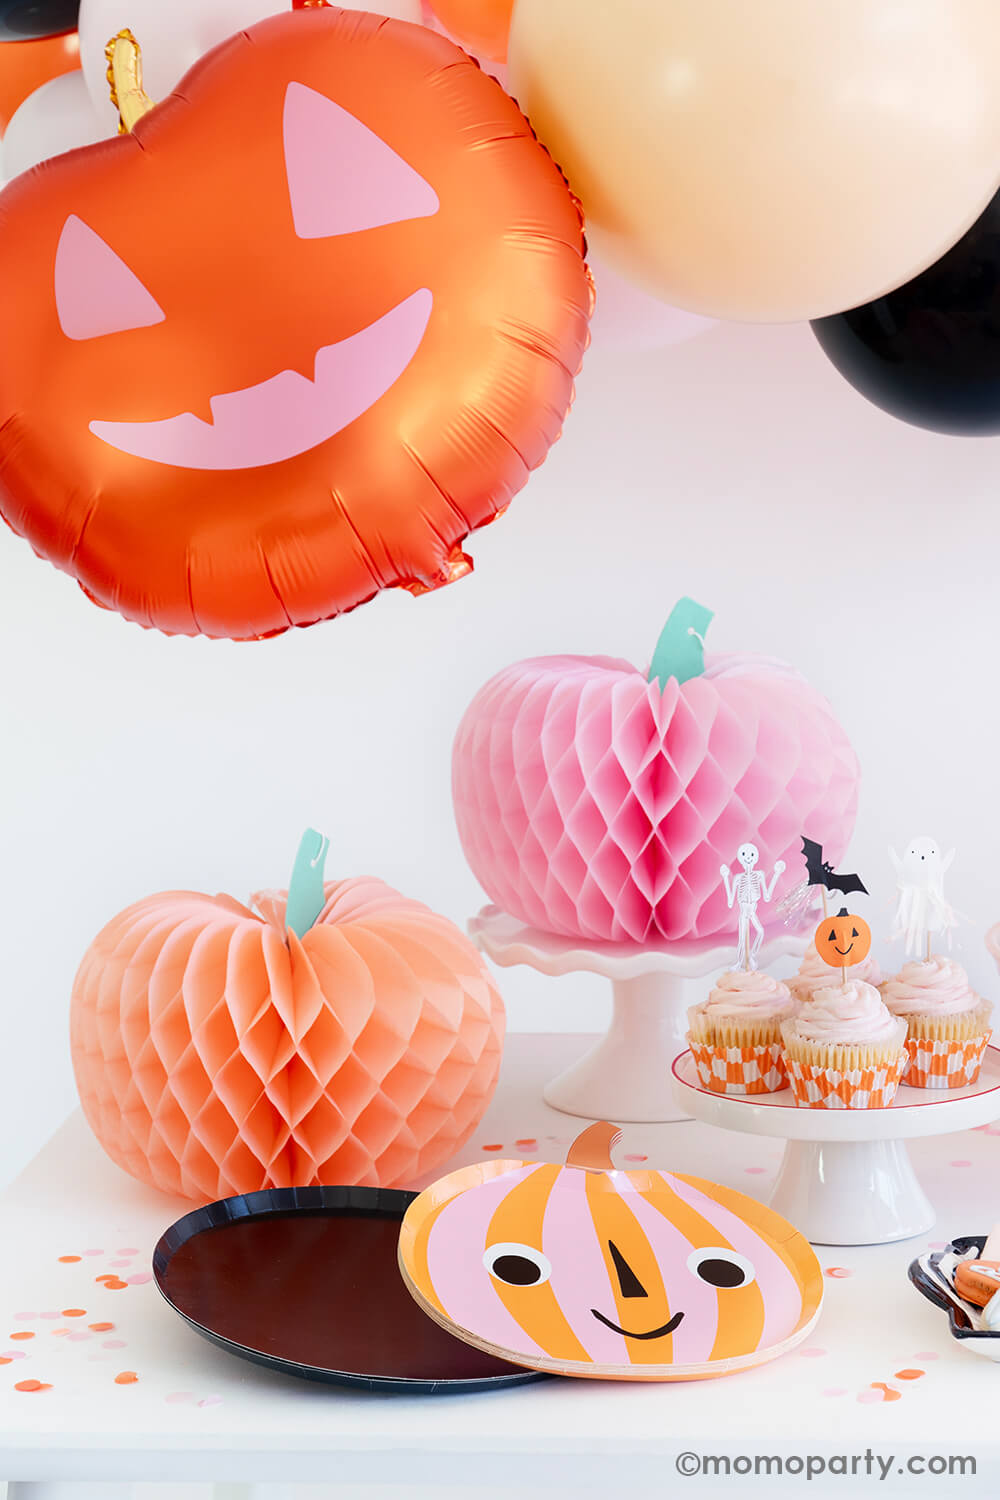 Momo Party's "Hey Pumpkin" party box featuring two honeycomb pumpkins in boo-tiful colors of pink and peach. With a smiley pumpkin shaped plates and a set of cute cupcakes topped with Halloween character toppers including a pumpkin, a skeleton, a bat and a ghost, with a happy pumpkin foil balloon hung above the table, it creates a spooky yet cute vibe for a fun Halloween party.